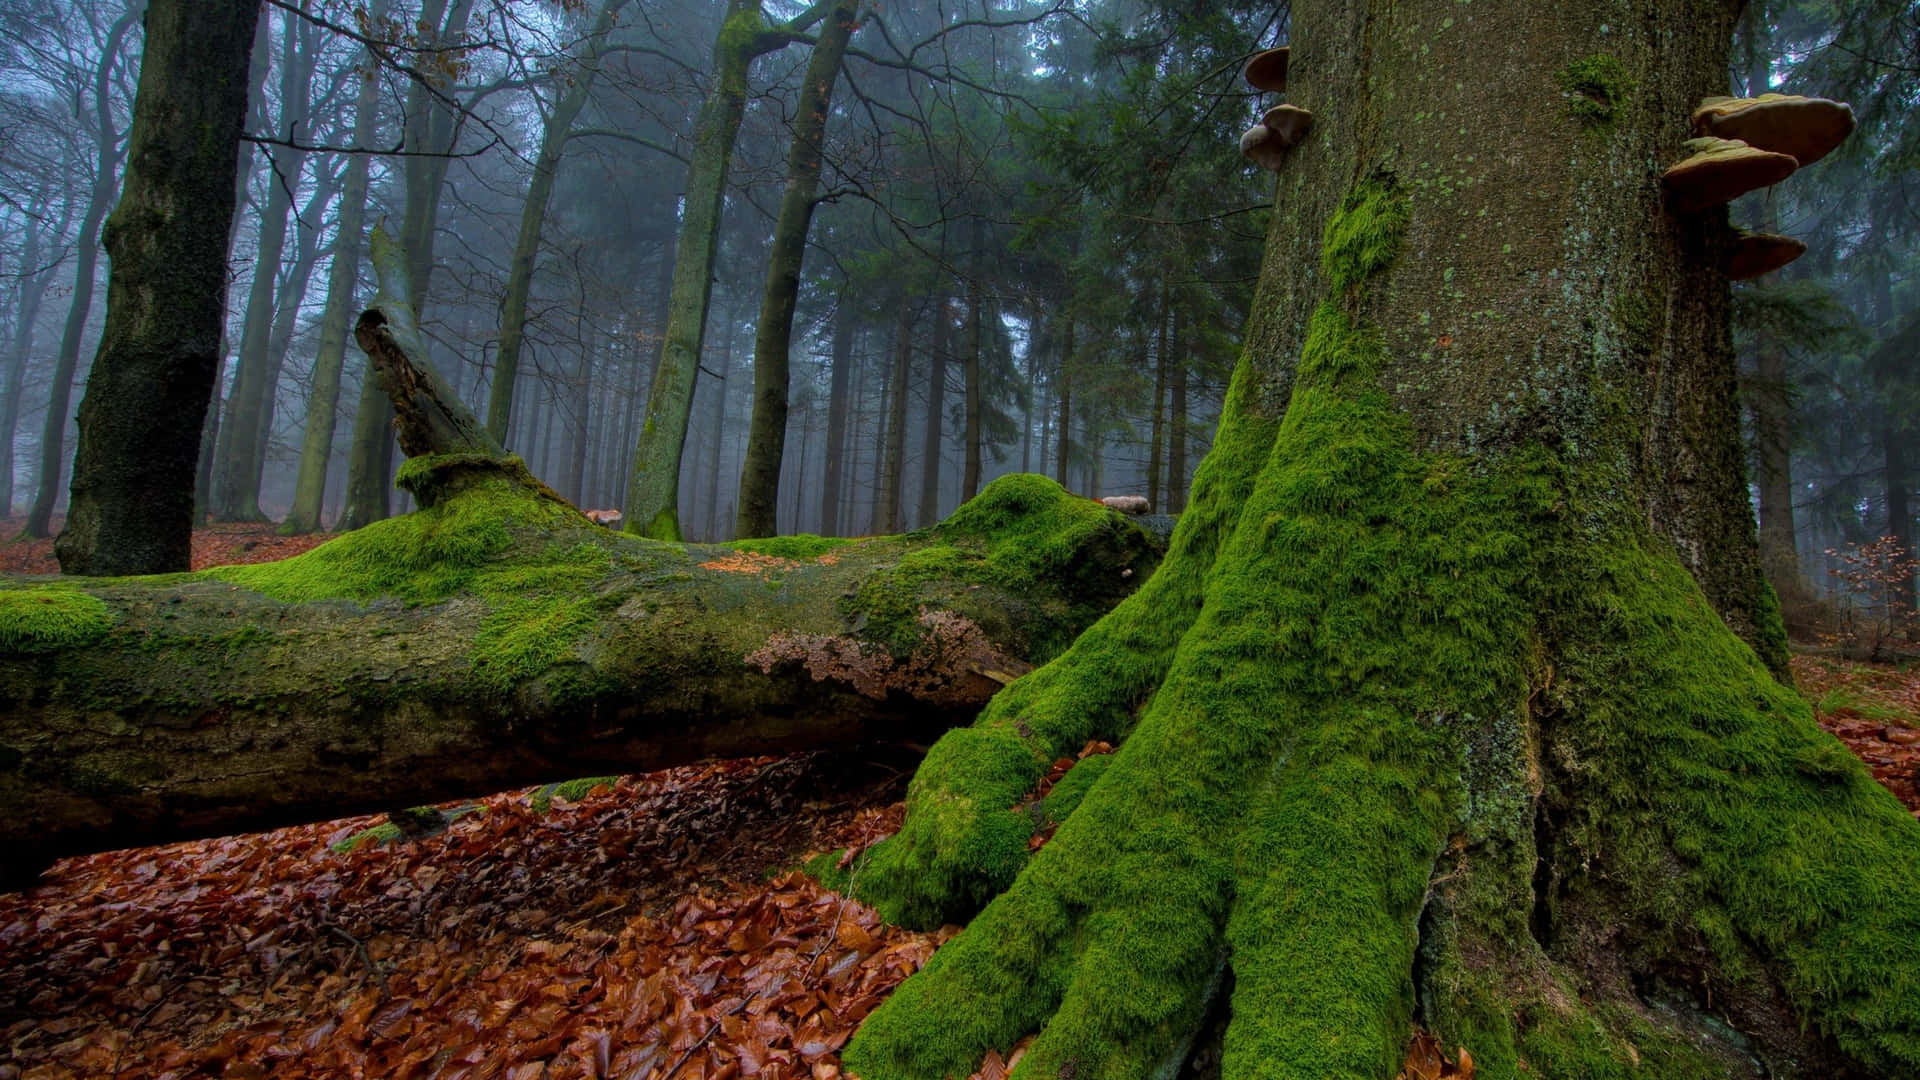 The Beauty of Nature - A Surreal Landscape Covered in Moss